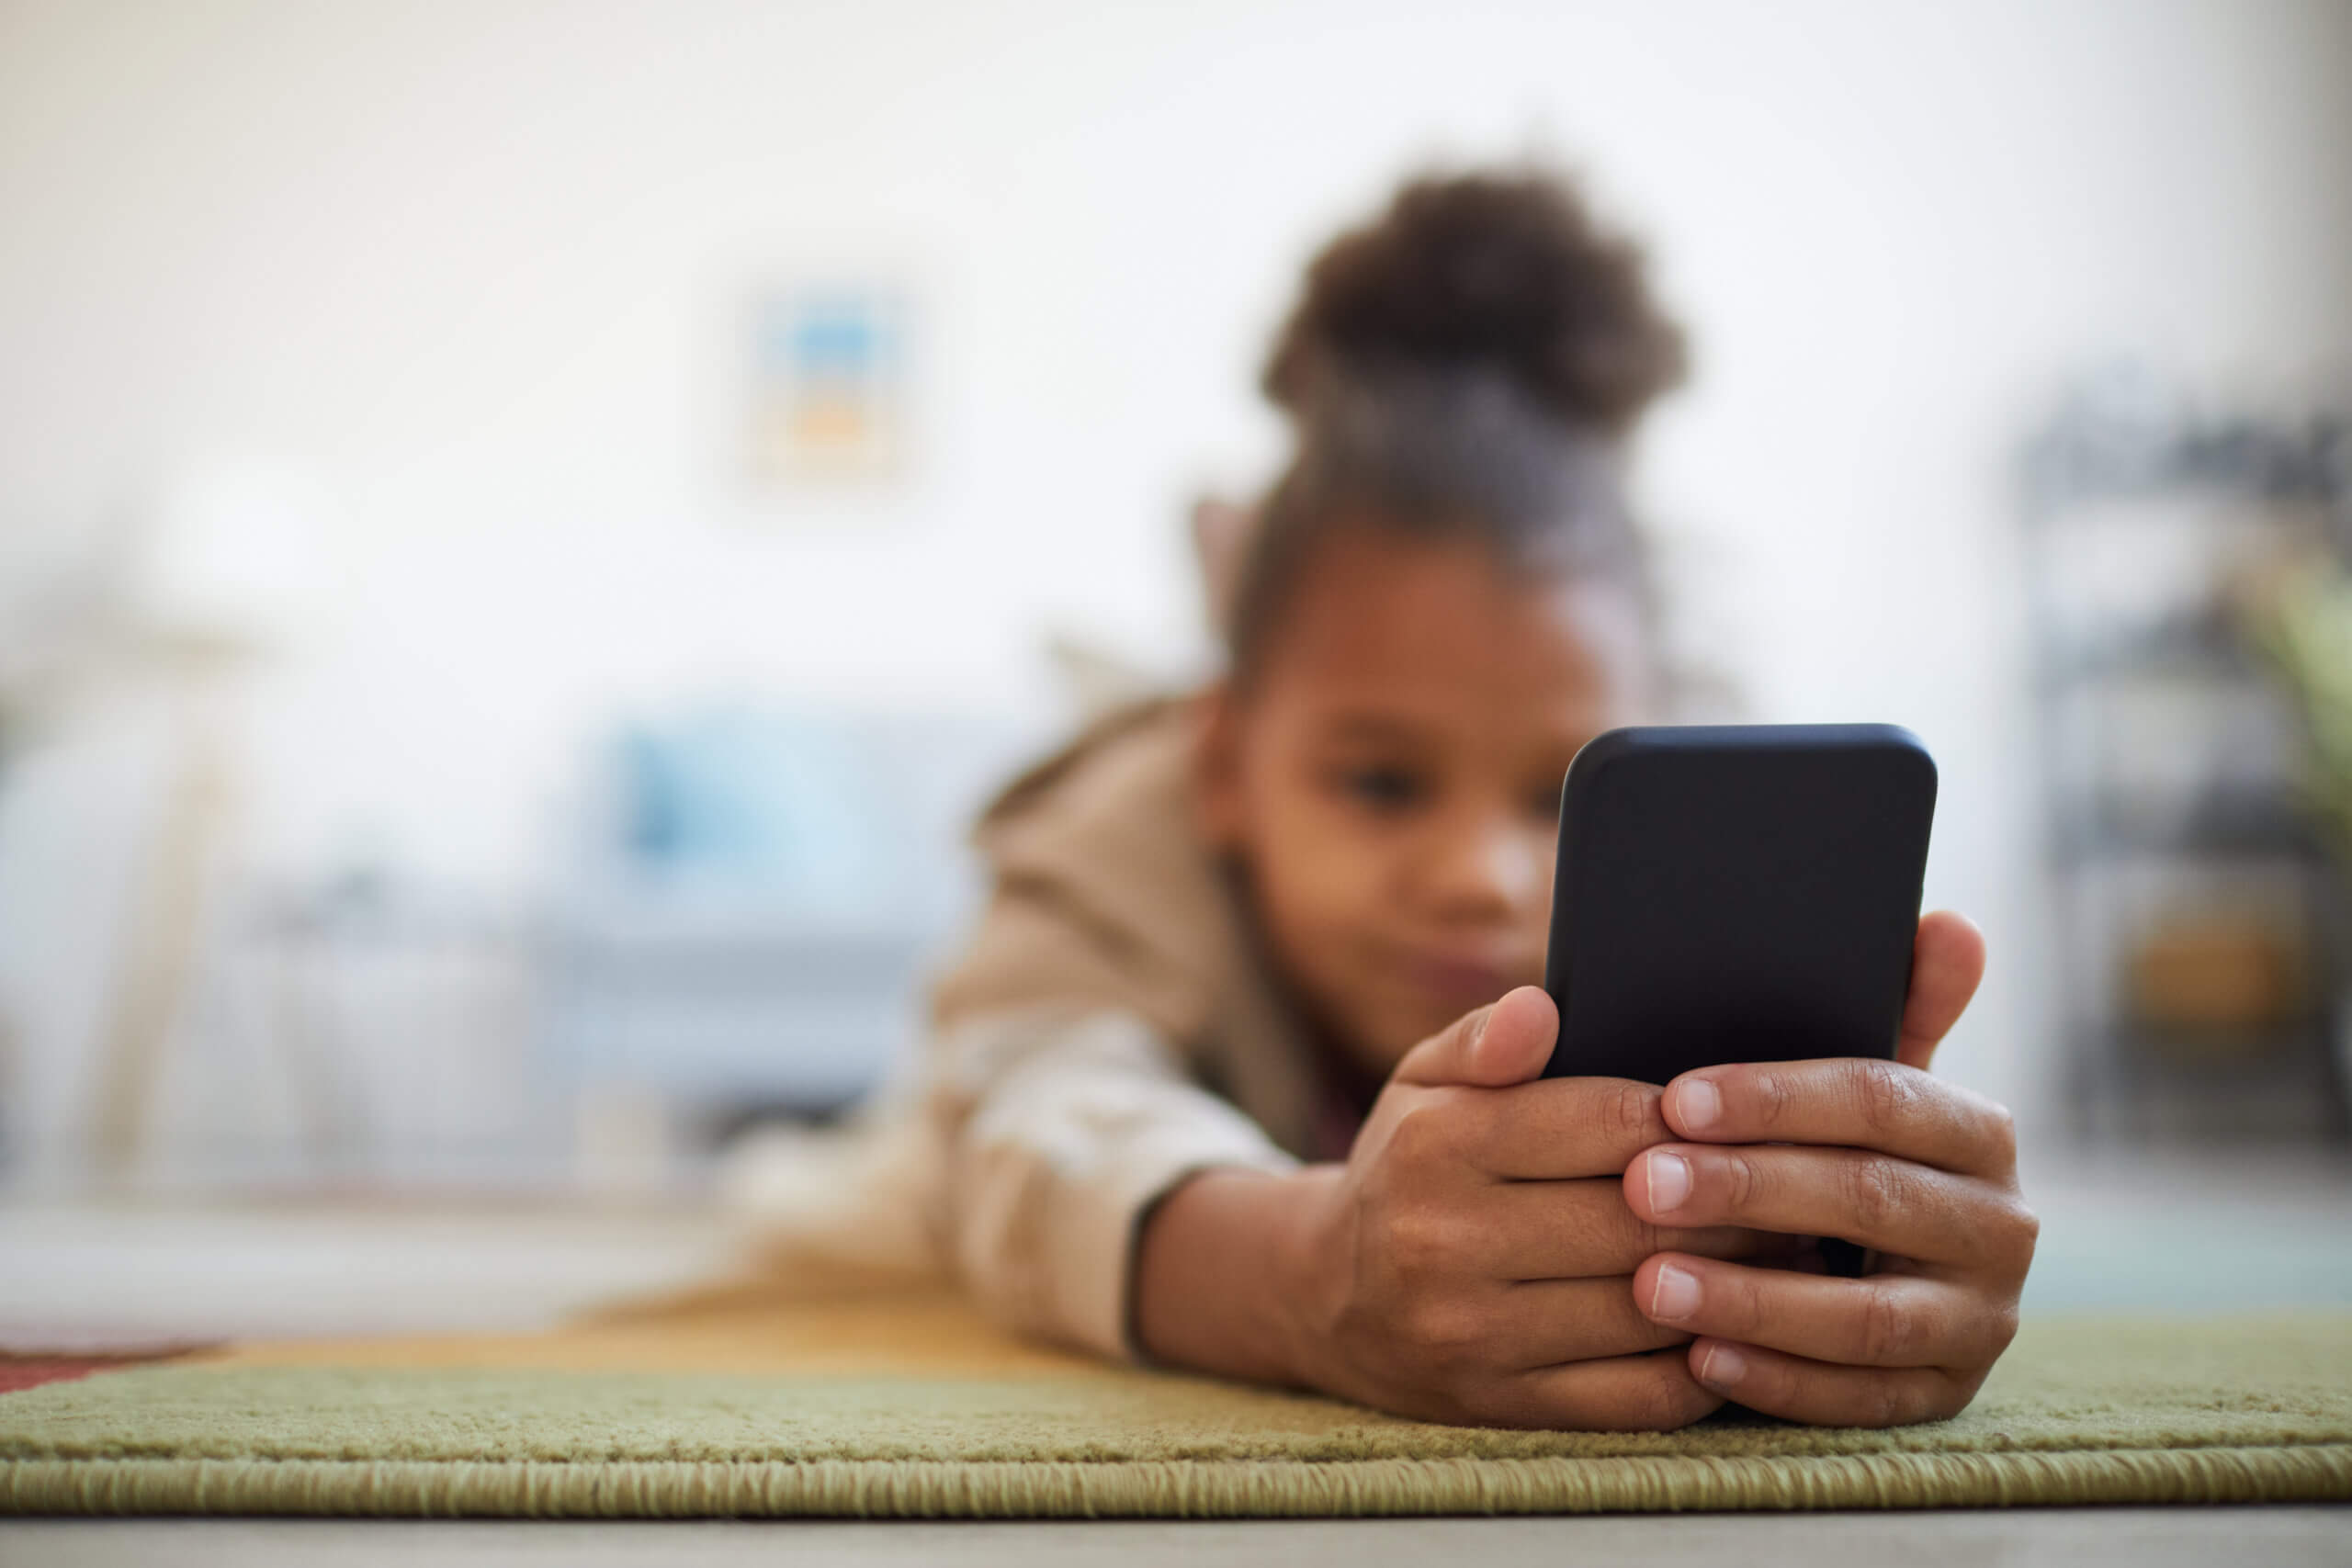 What is Tumblr? Parent tips to keep kids safe